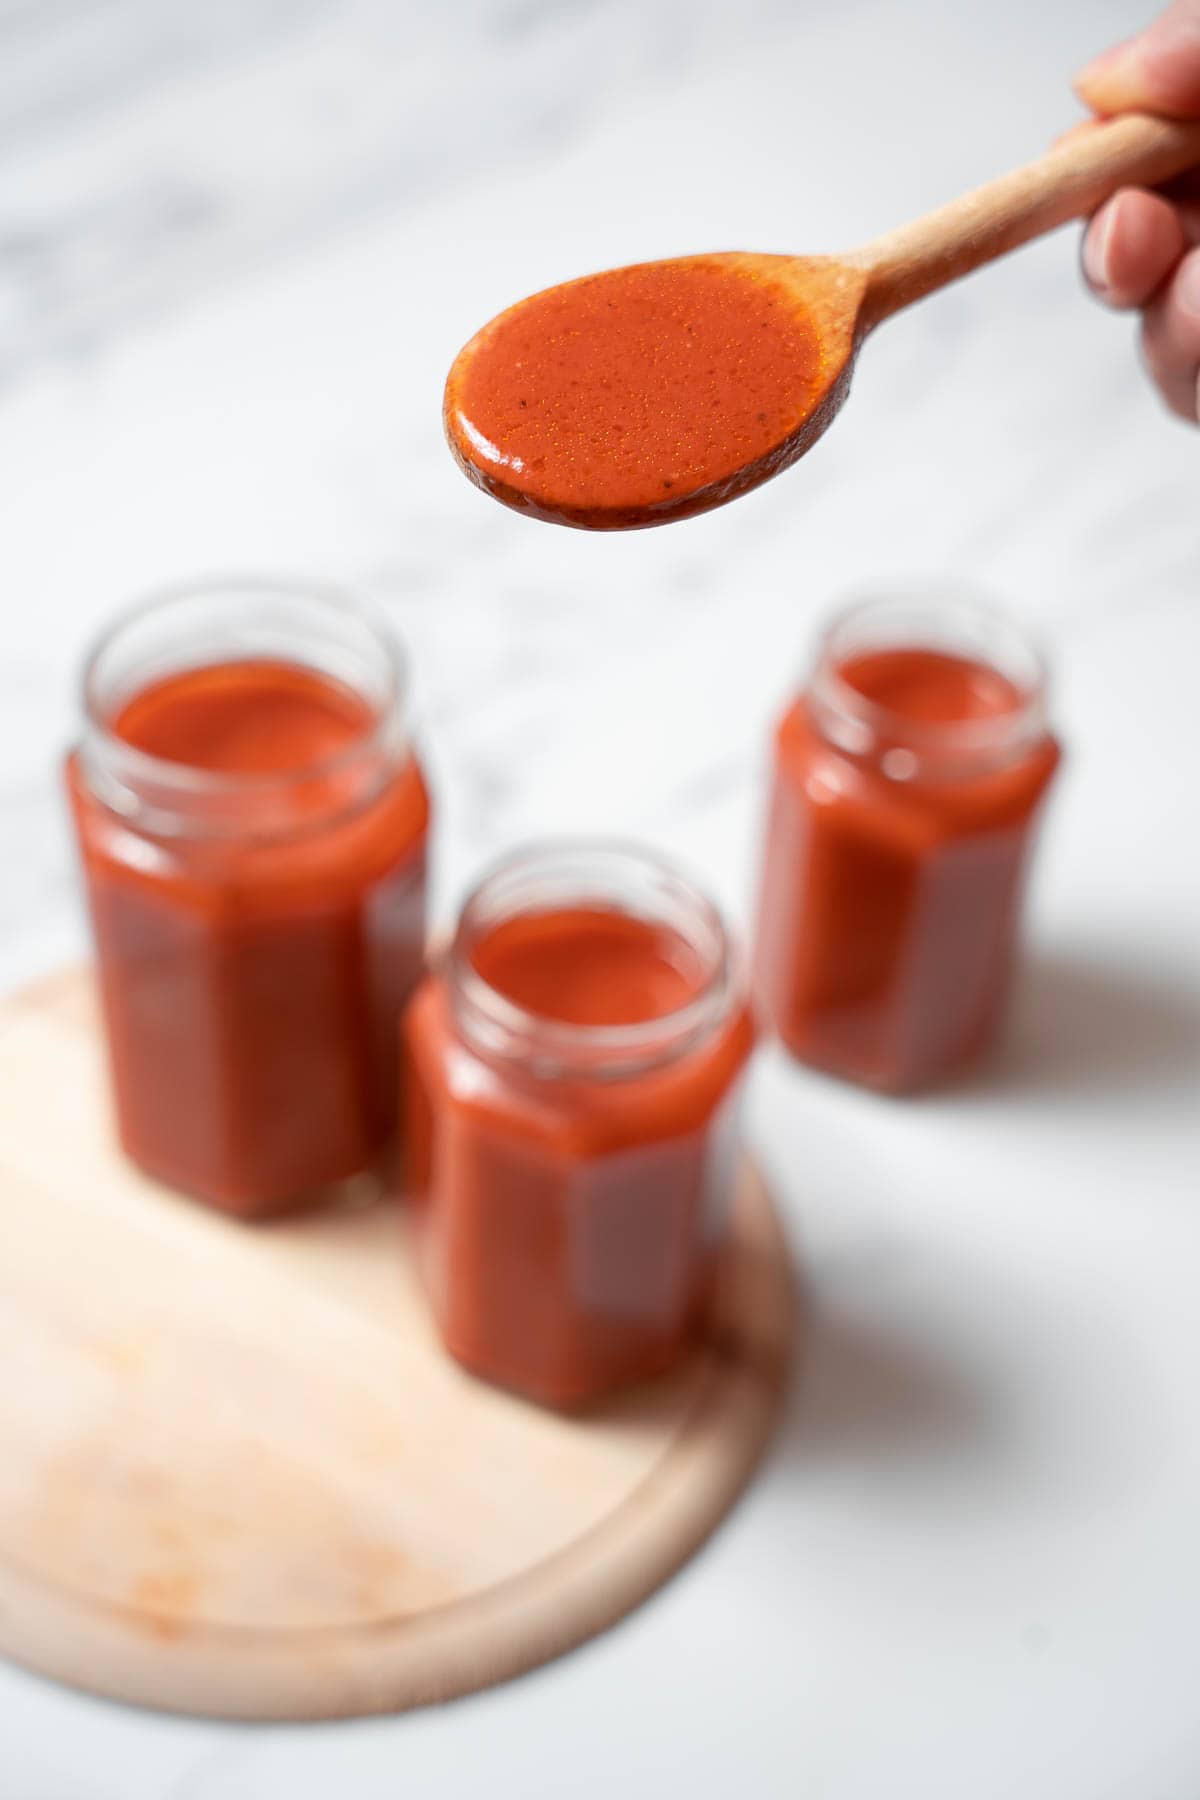 holding a spoonful of salsa de tomate.